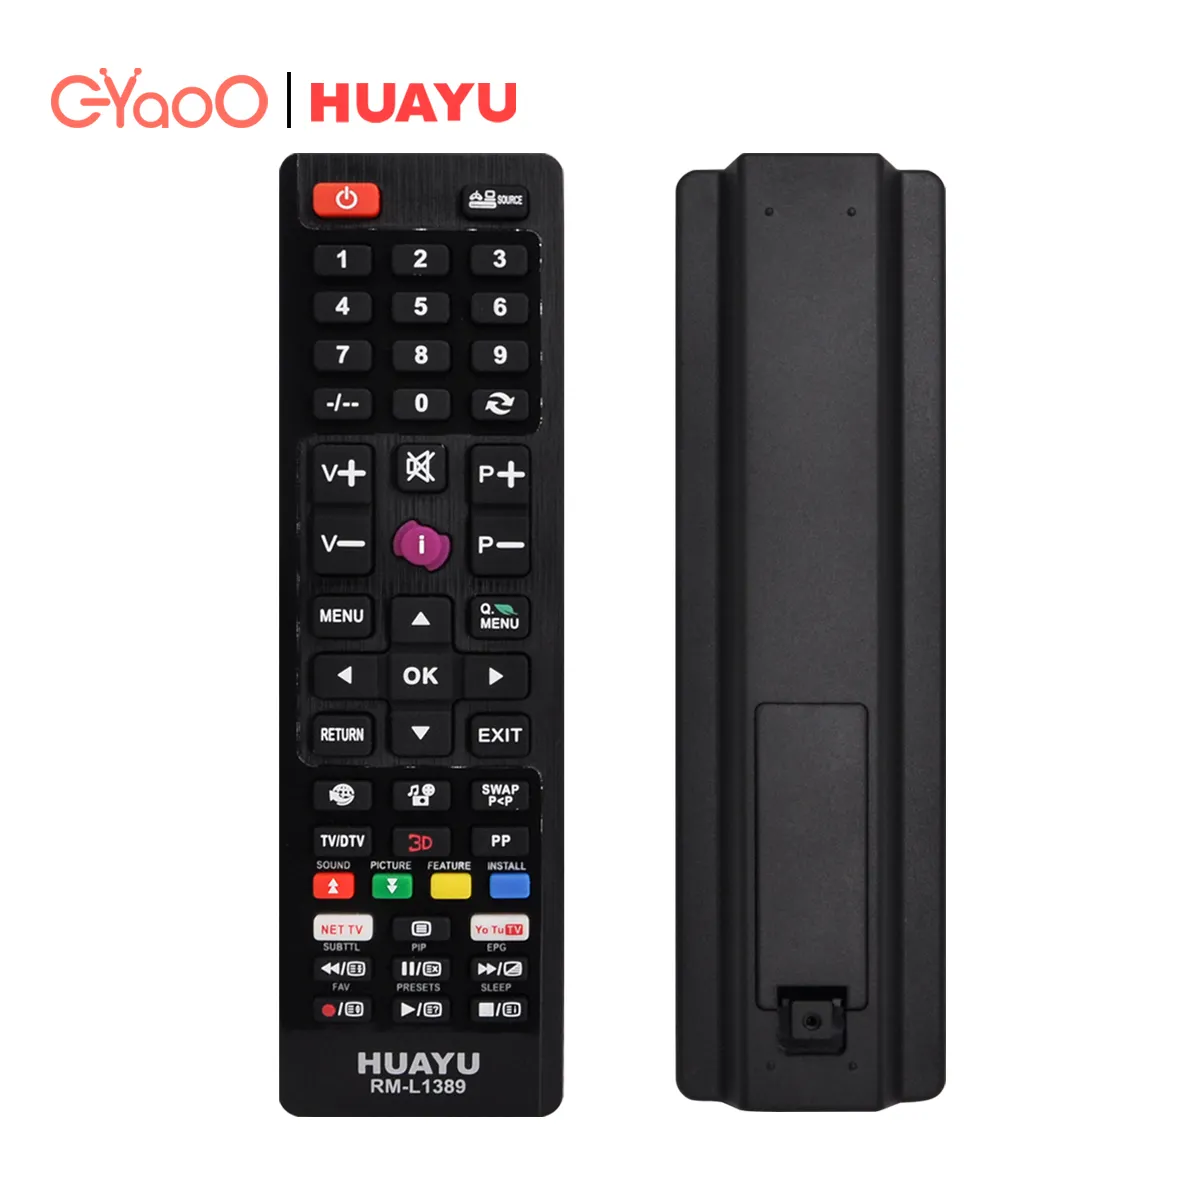 HUAYU EYAOO RM-L1389 MINI TV REMOTE BRAND TV Universal Replacement remote control FOR SMART LCD LED TV